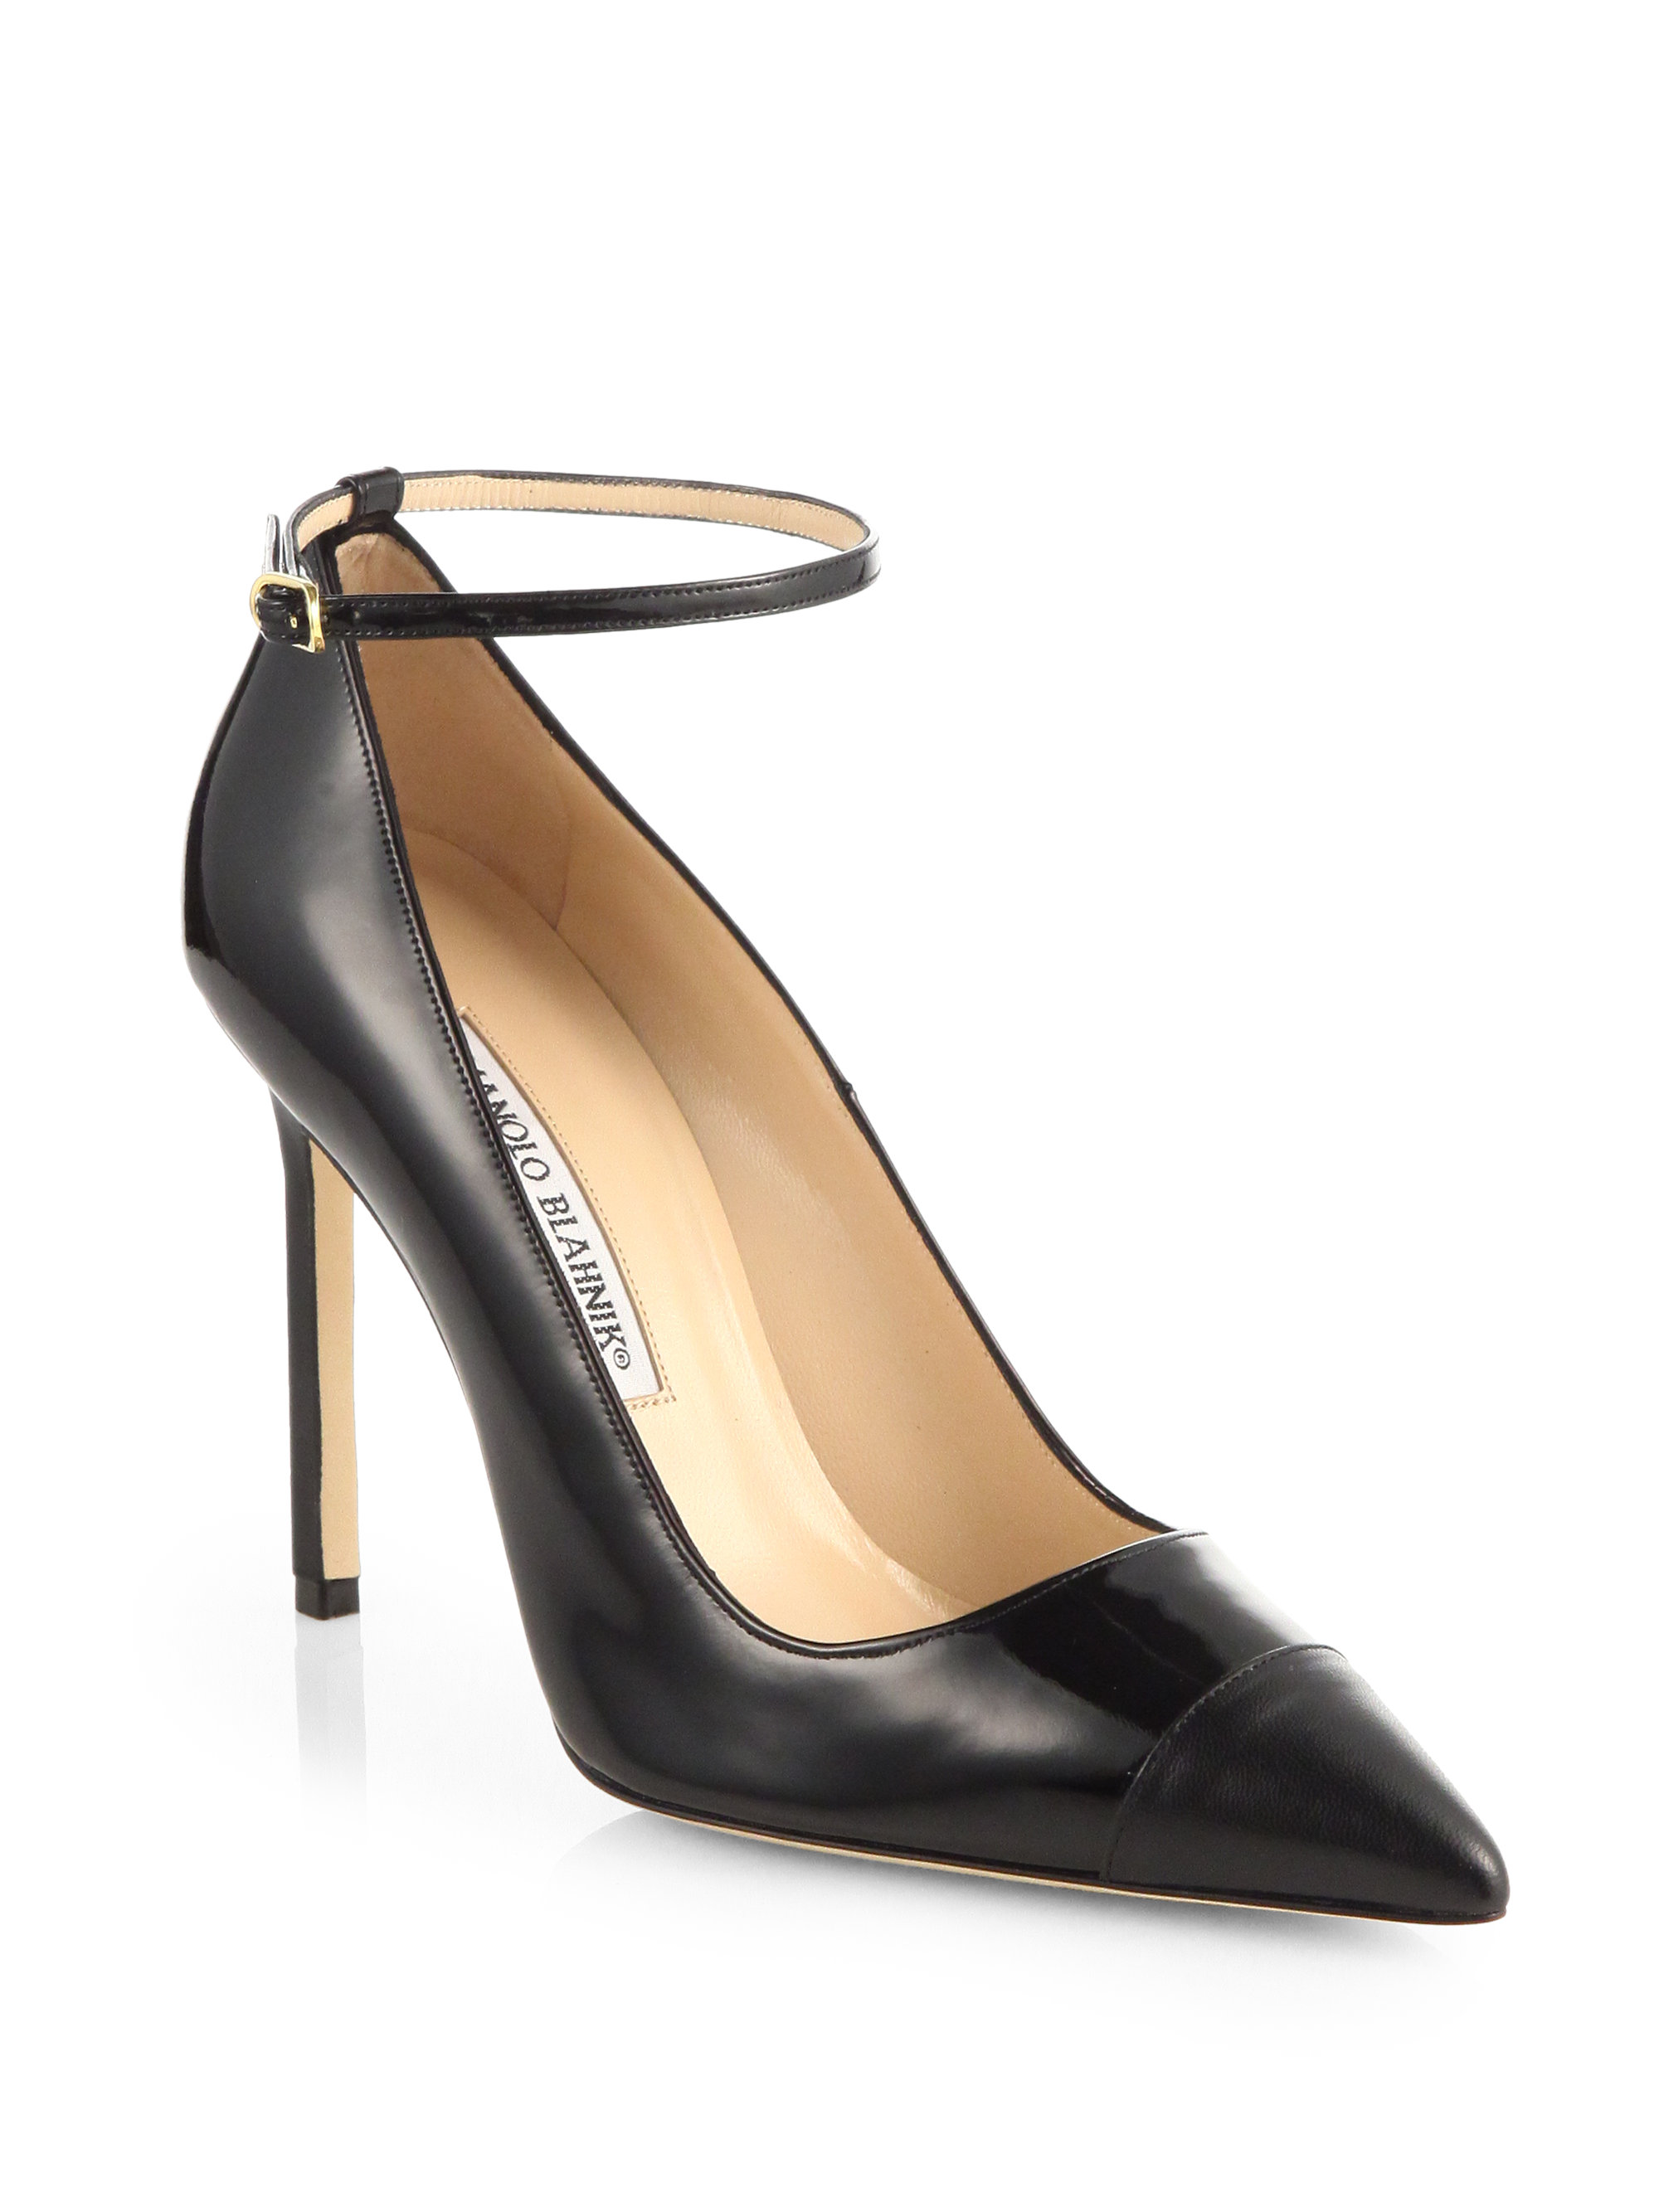 Manolo blahnik Bb Patent Leather Ankle Strap Pumps in Black | Lyst